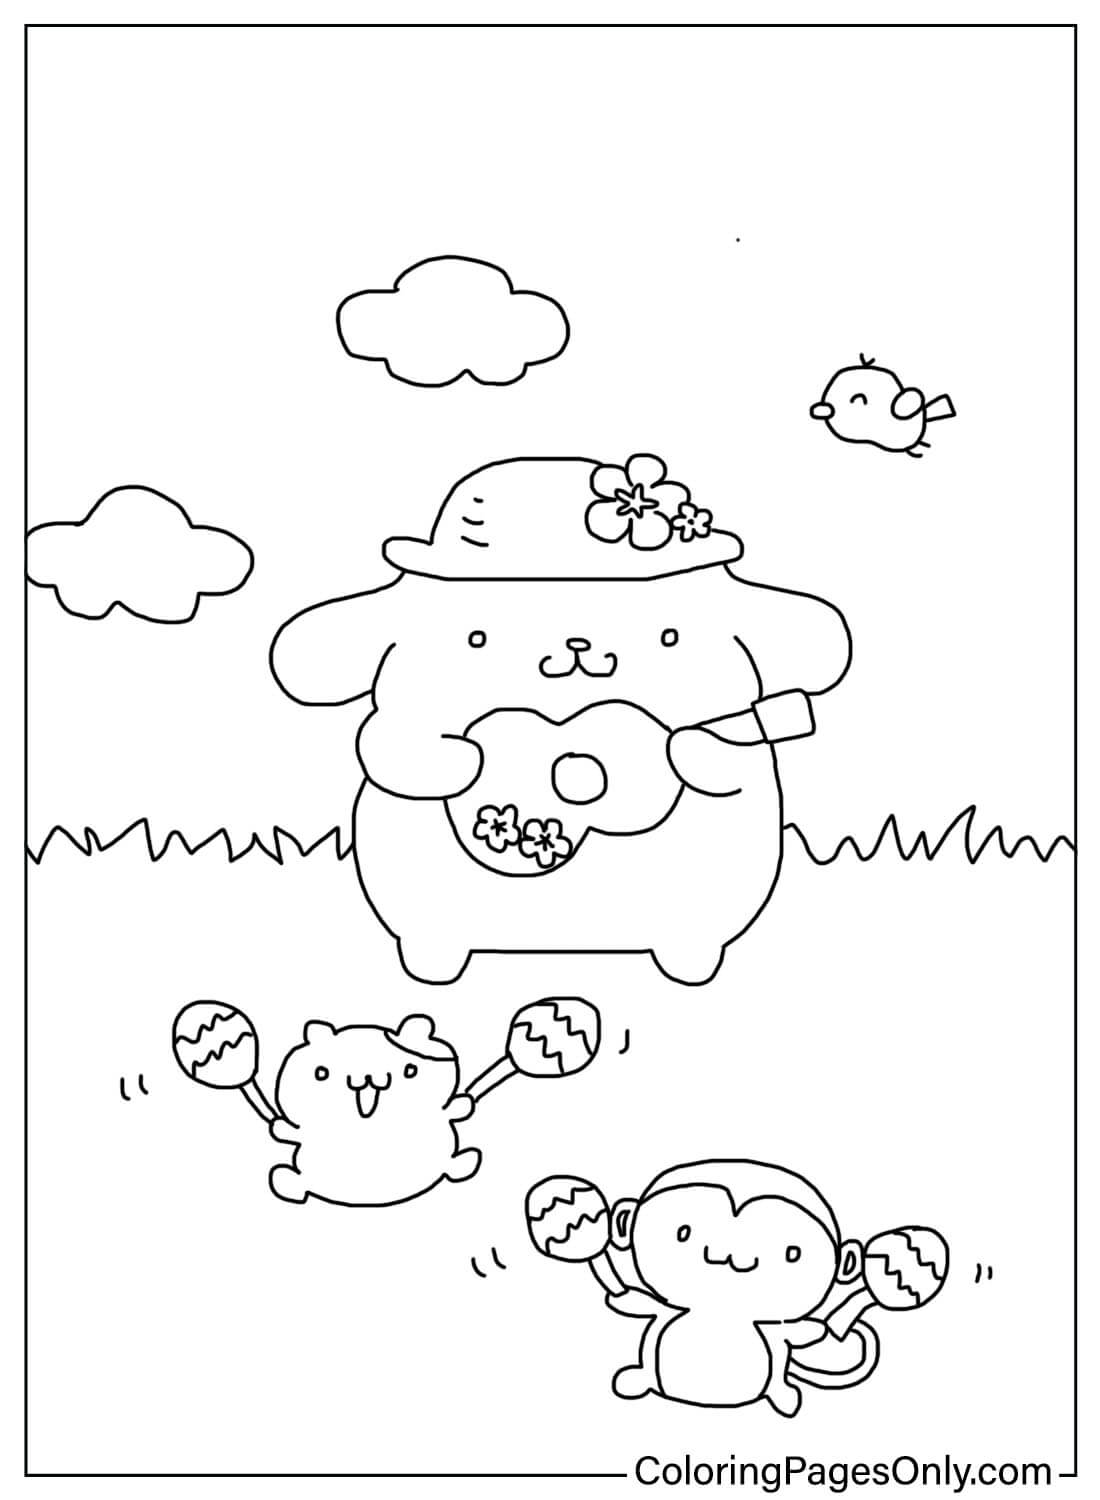 Coloring Book Pompompurin from Pompompurin